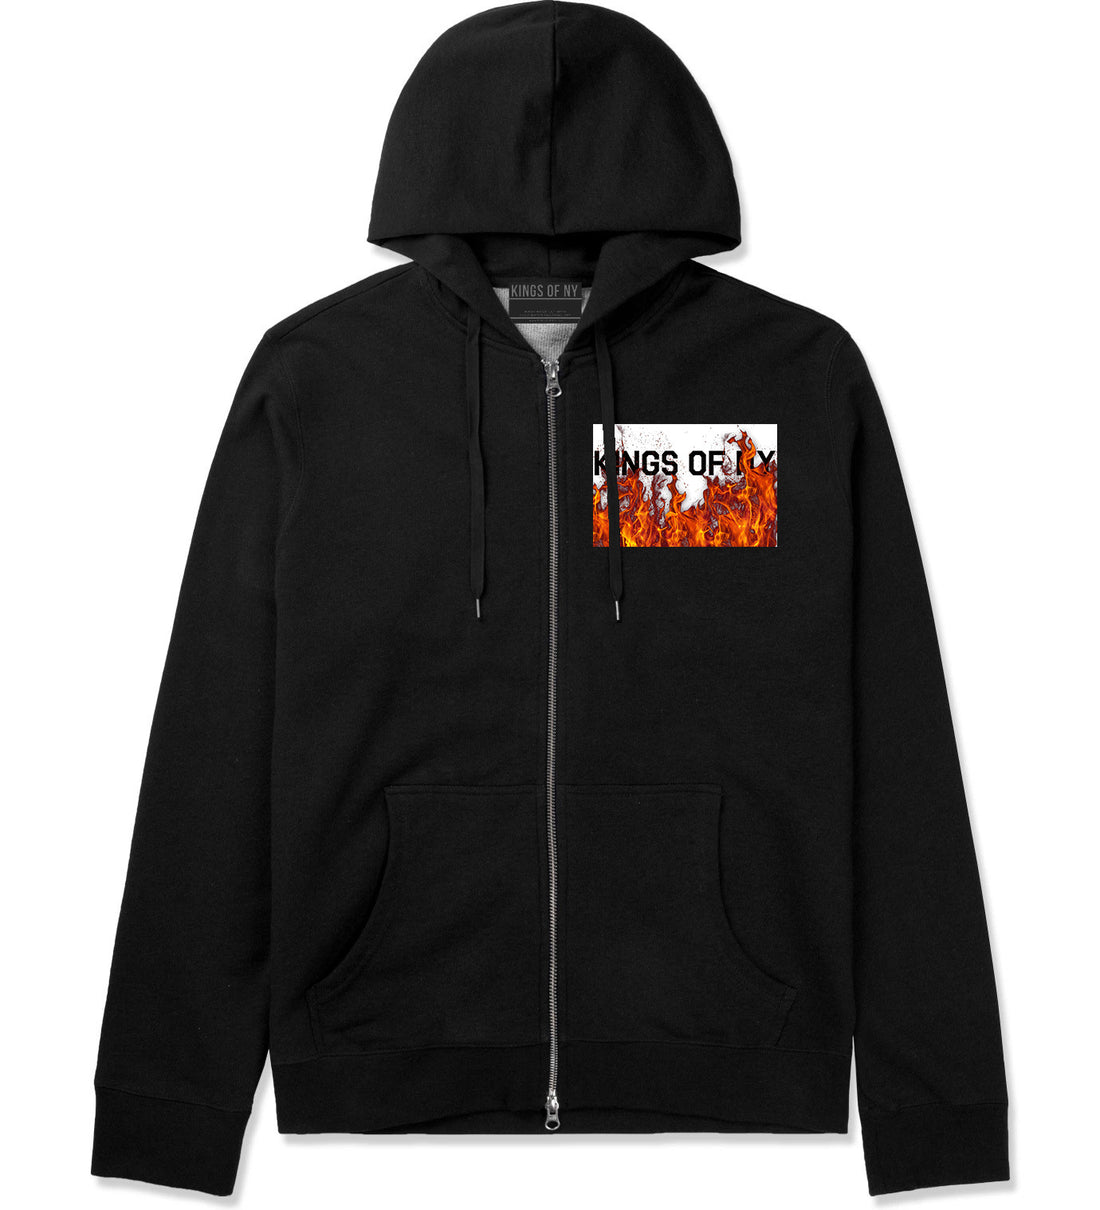 Rising From The Flames Zip Up Hoodie in Black